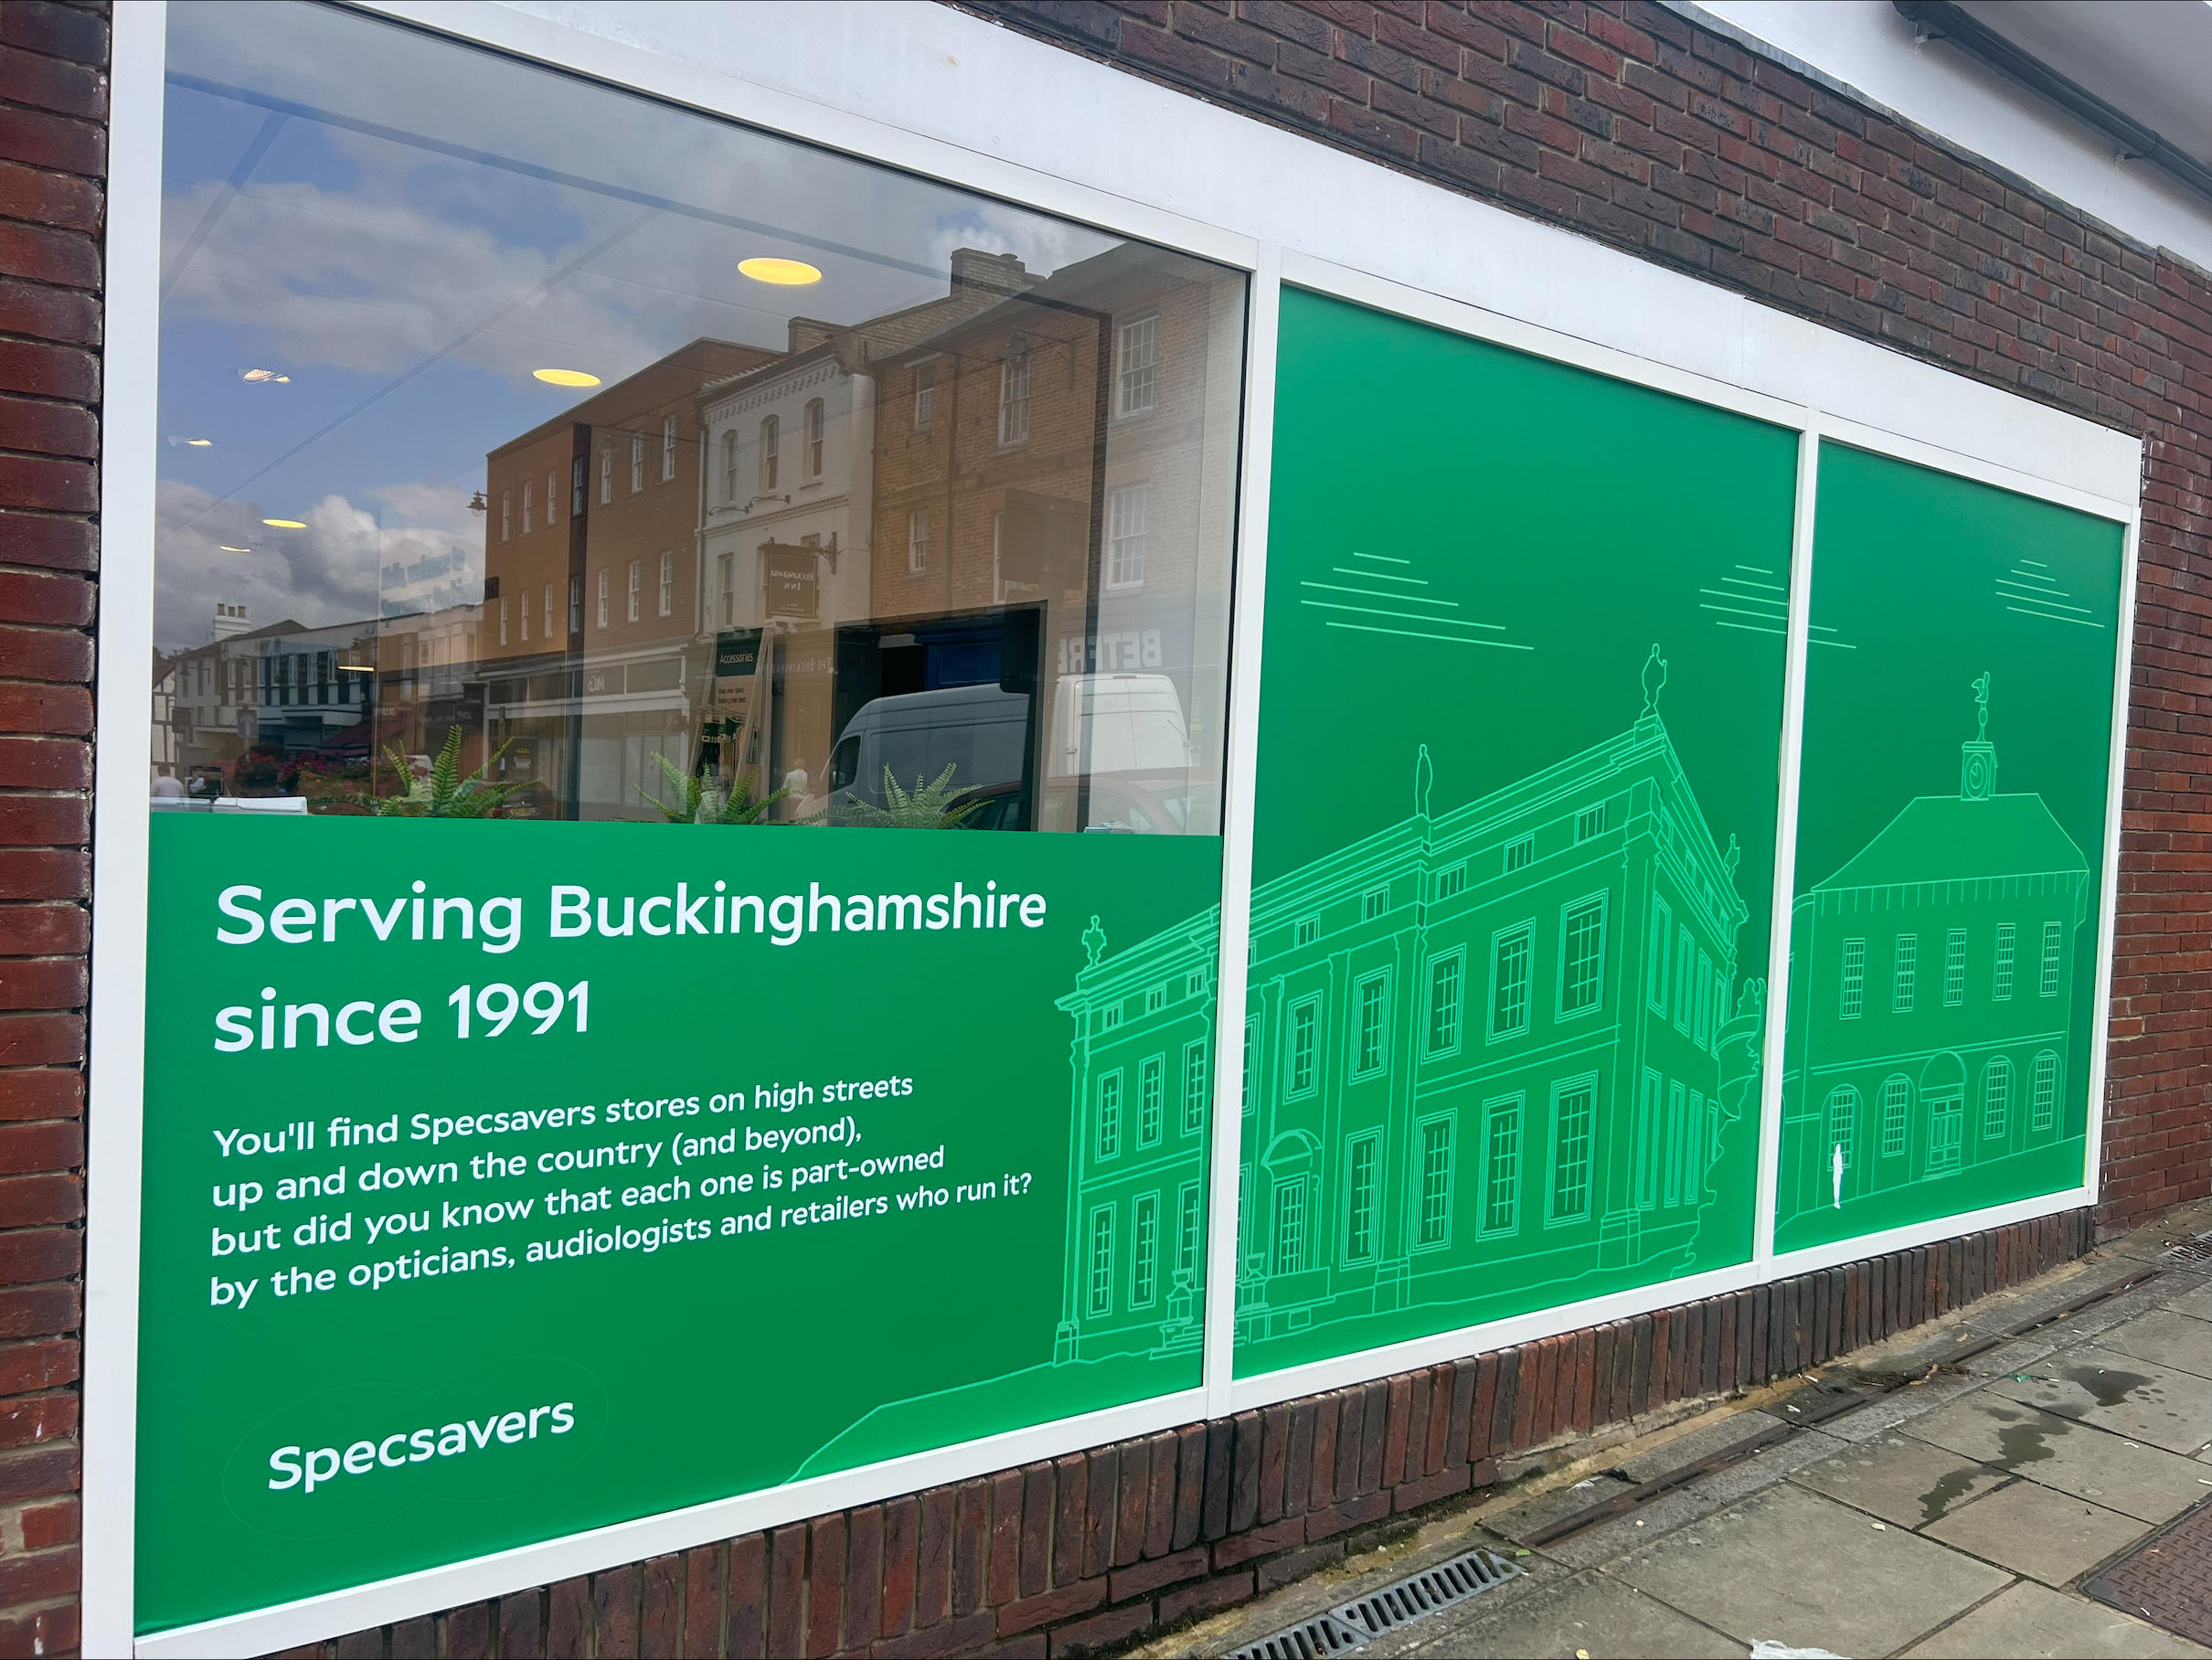 Images Specsavers Opticians and Audiologists - Buckingham